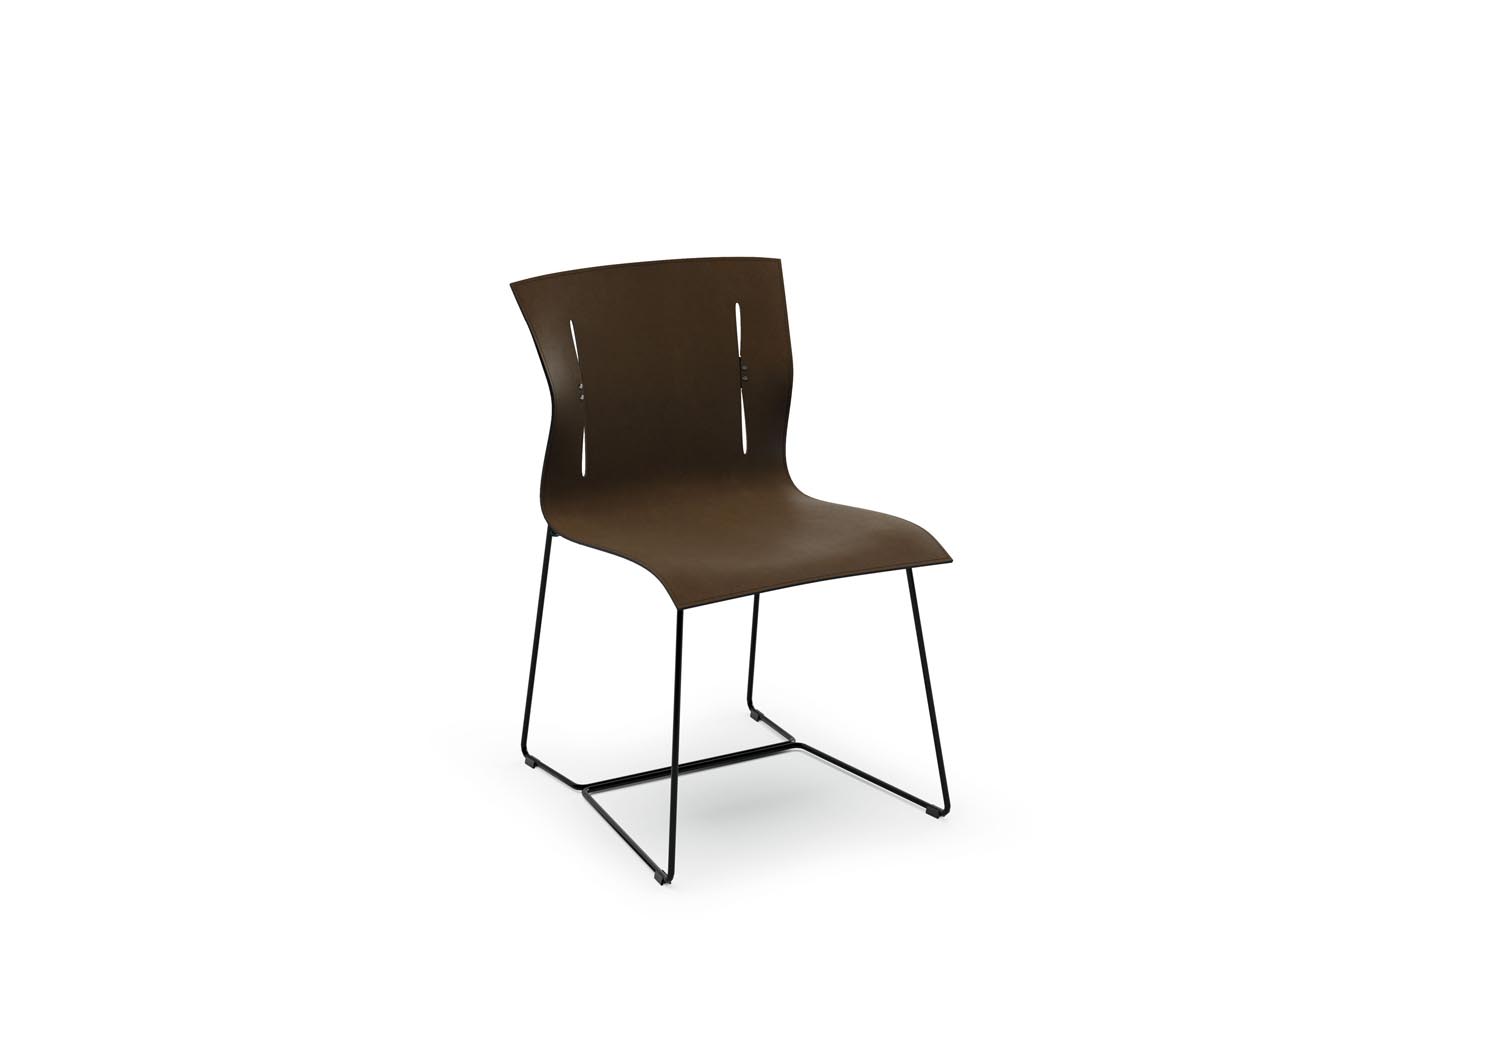 Walter Knoll Cuoio ChAIR